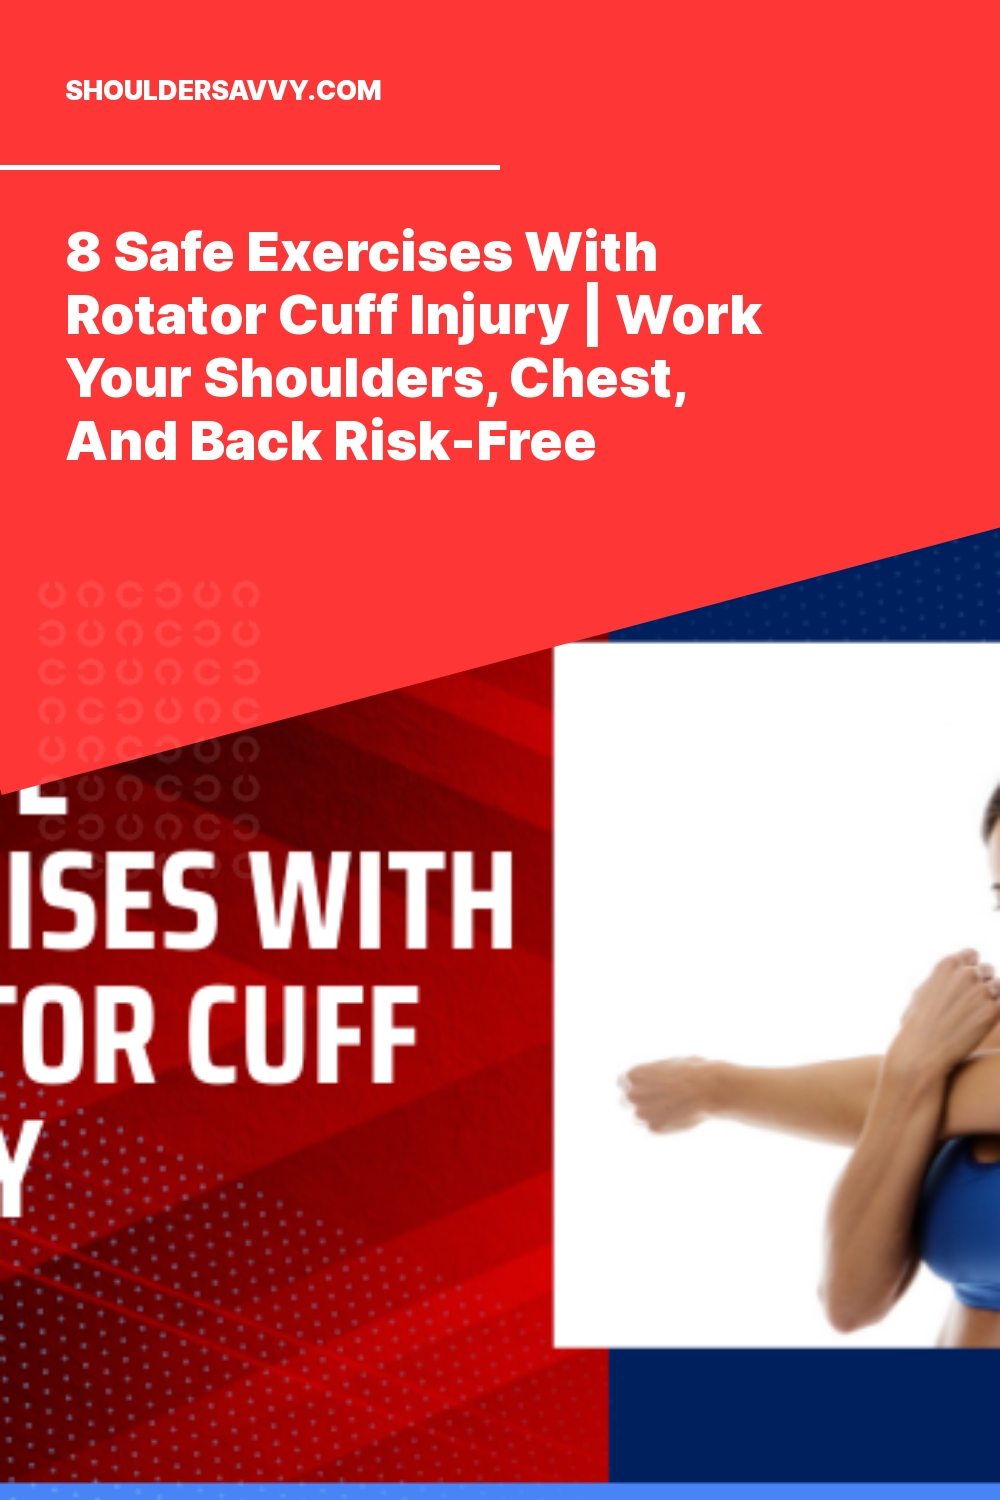 8 Safe Exercises With Rotator Cuff Injury | Work Your Shoulders, Chest, And Back Risk-Free